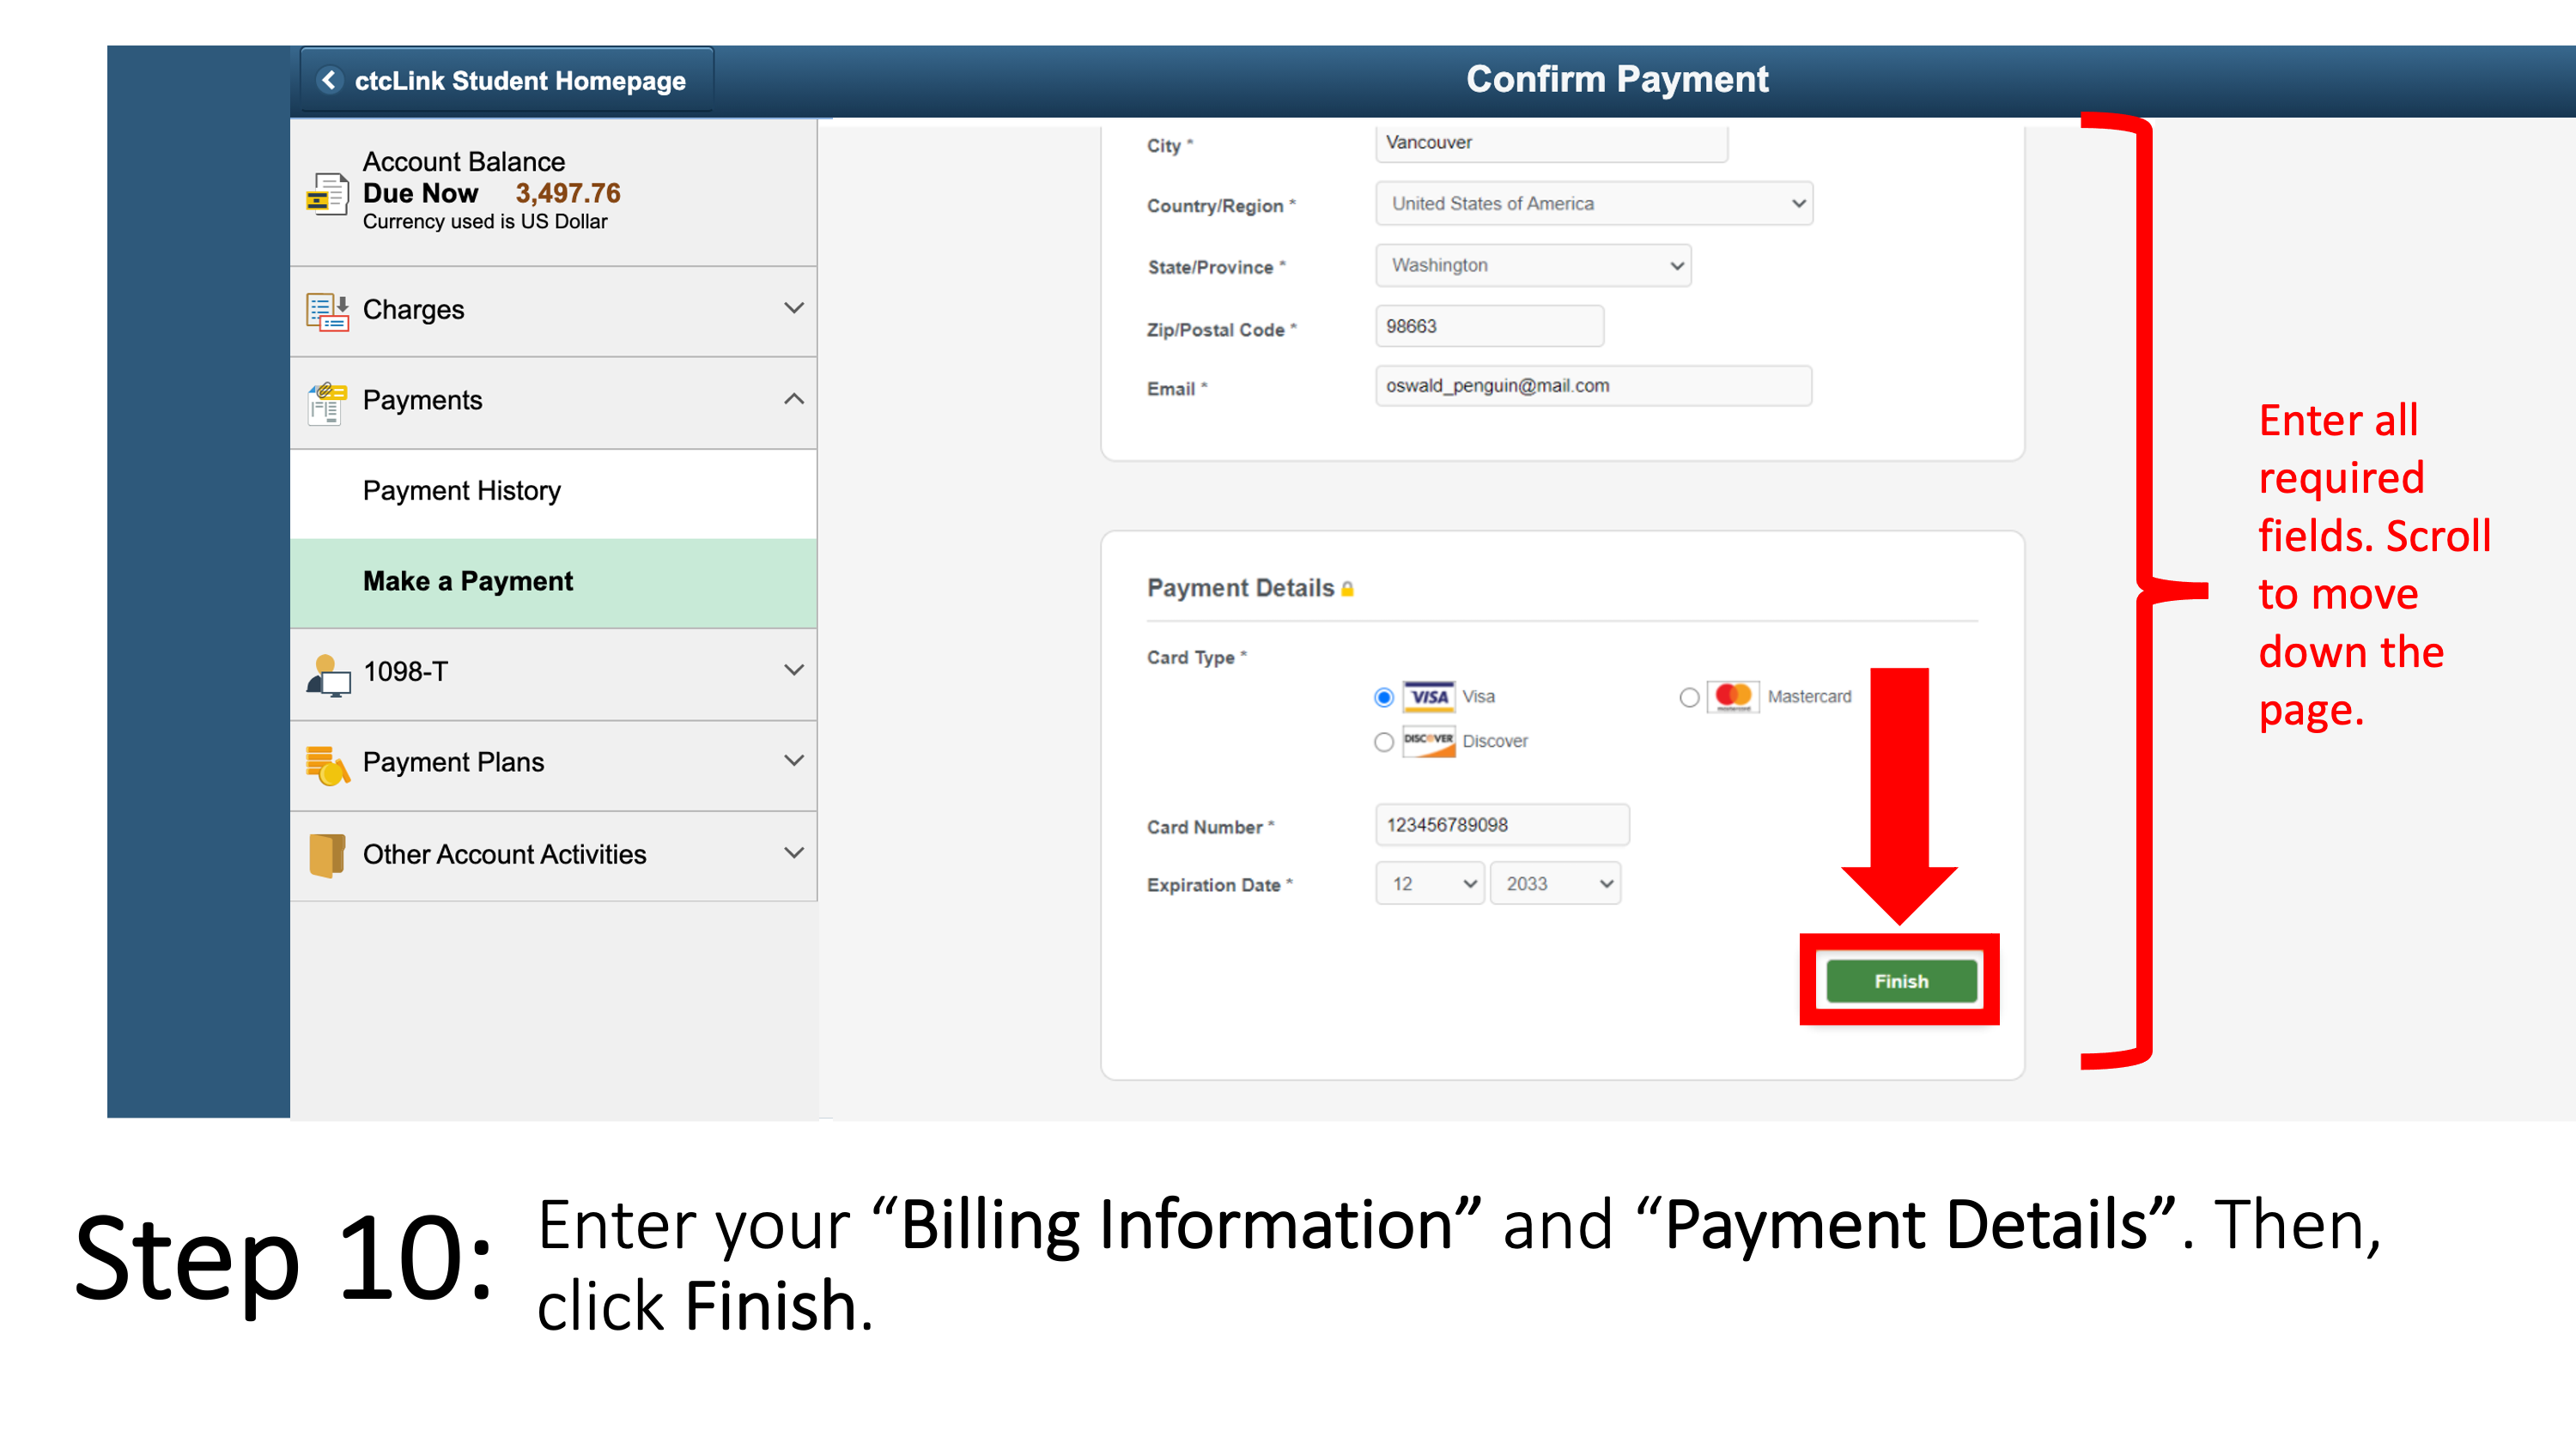 Enter your “Billing Information” and “Payment Details”. Then, click Finish.